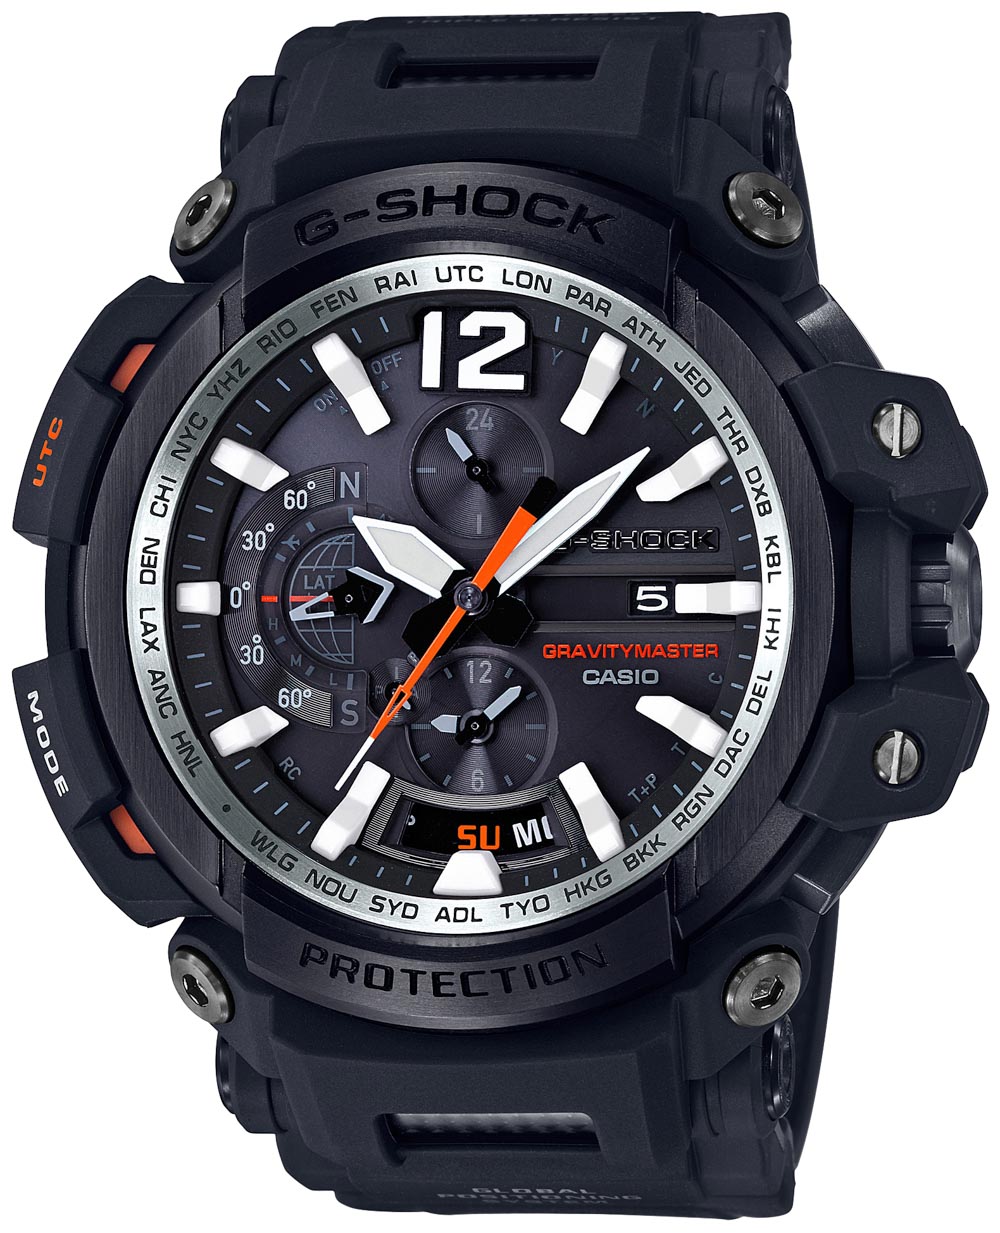 Casio-G-Shock-Gravitymaster-Connected-GPW2000-1A-GPS-aBlogtoWatch-9